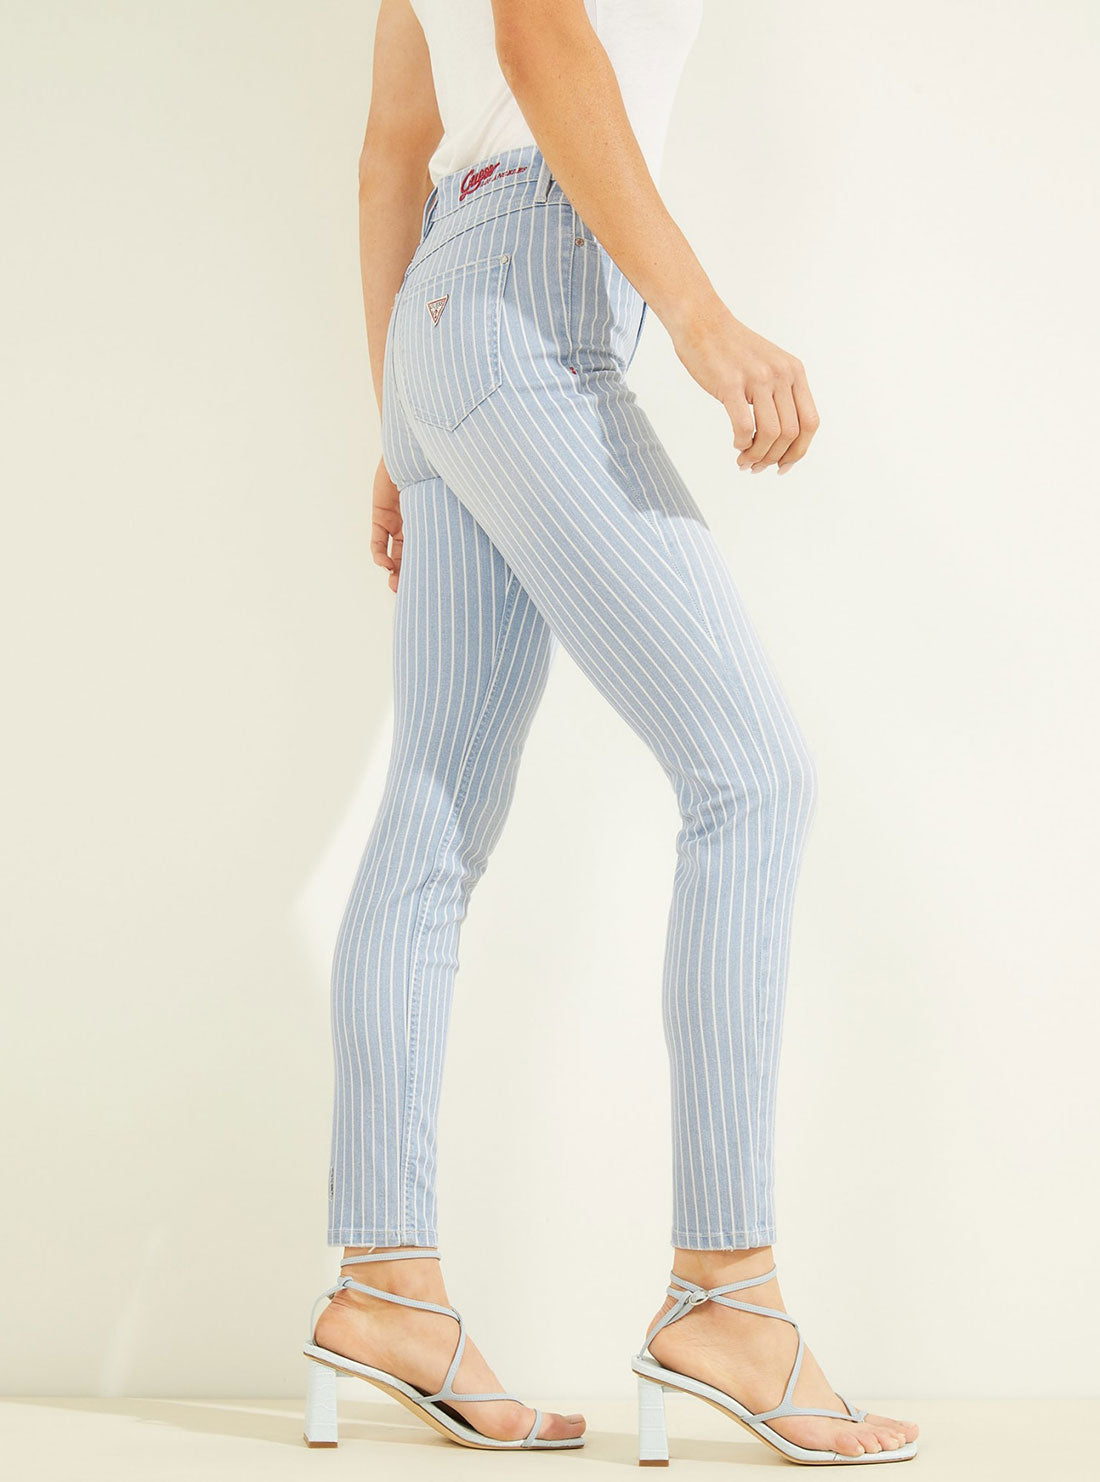 GUESS Womens High-Rise Skinny Fit 1981 Denim Jeans In Pinstripe Light Wash W2GA46D4DN5 Side View